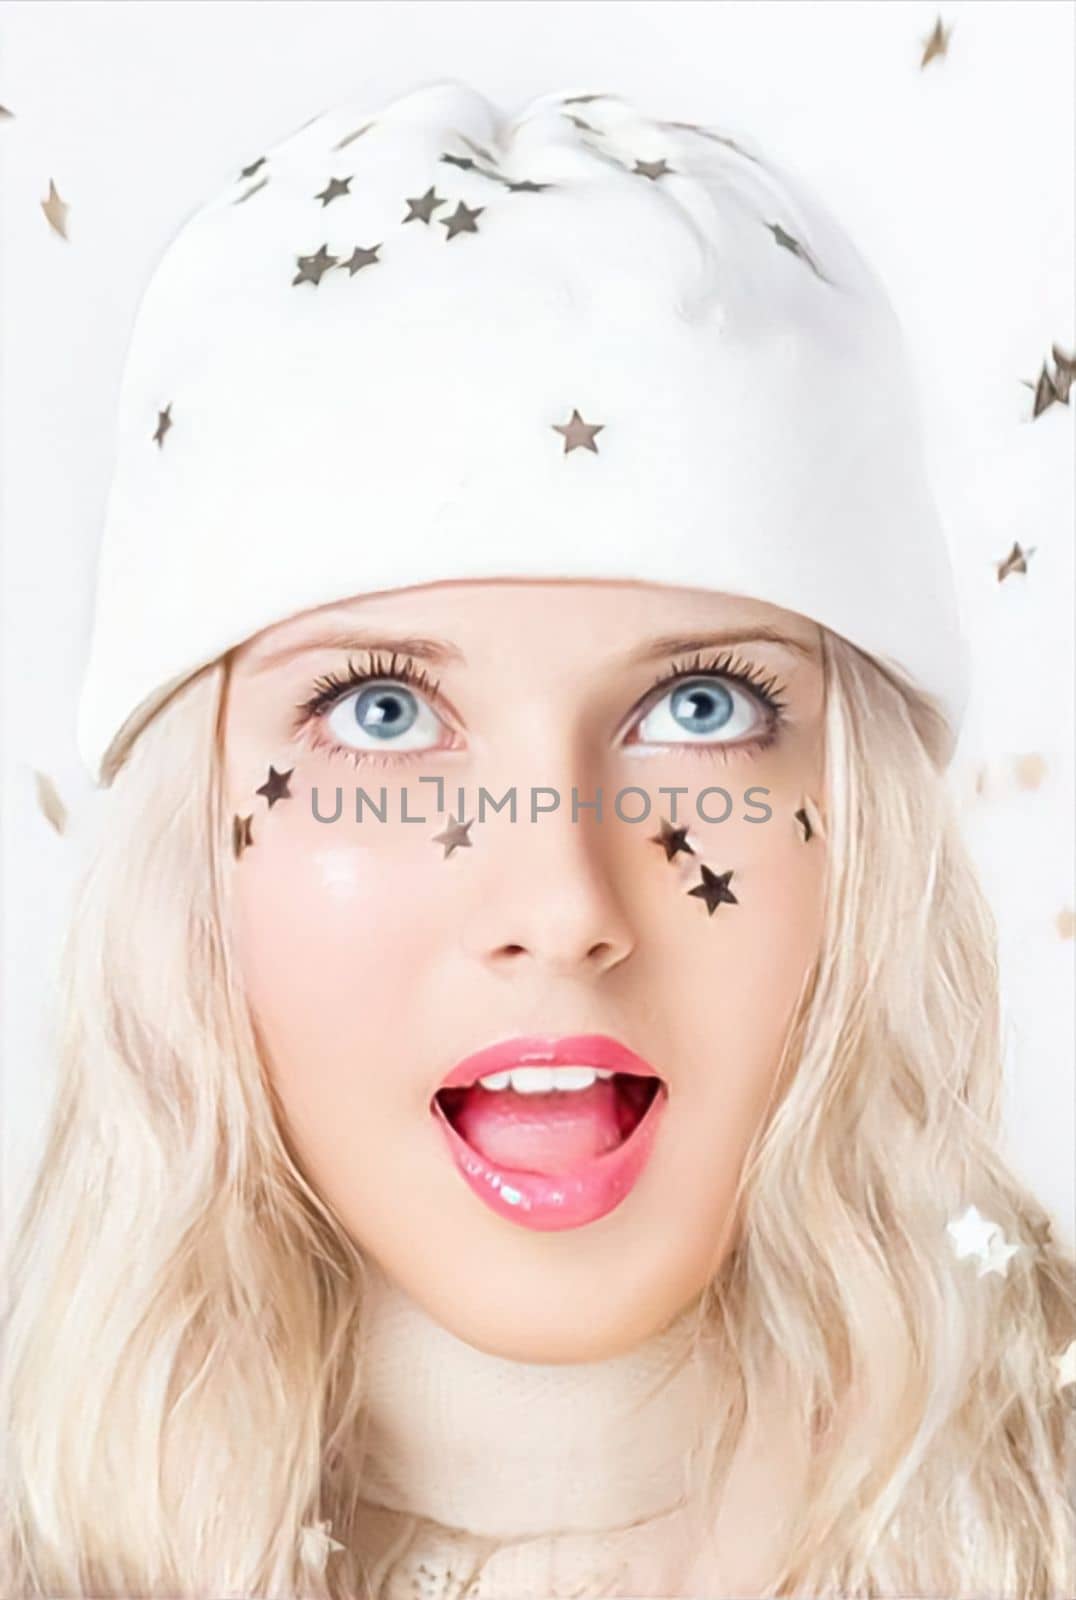 Merry Christmas, happy holidays, a woman playing with confetti stars while wearing a white benny hat, festivity and beauty. Funny blonde girl smiling in a studio portrait as she enjoys the winter holidays, including Christmas and New Year's by Anneleven